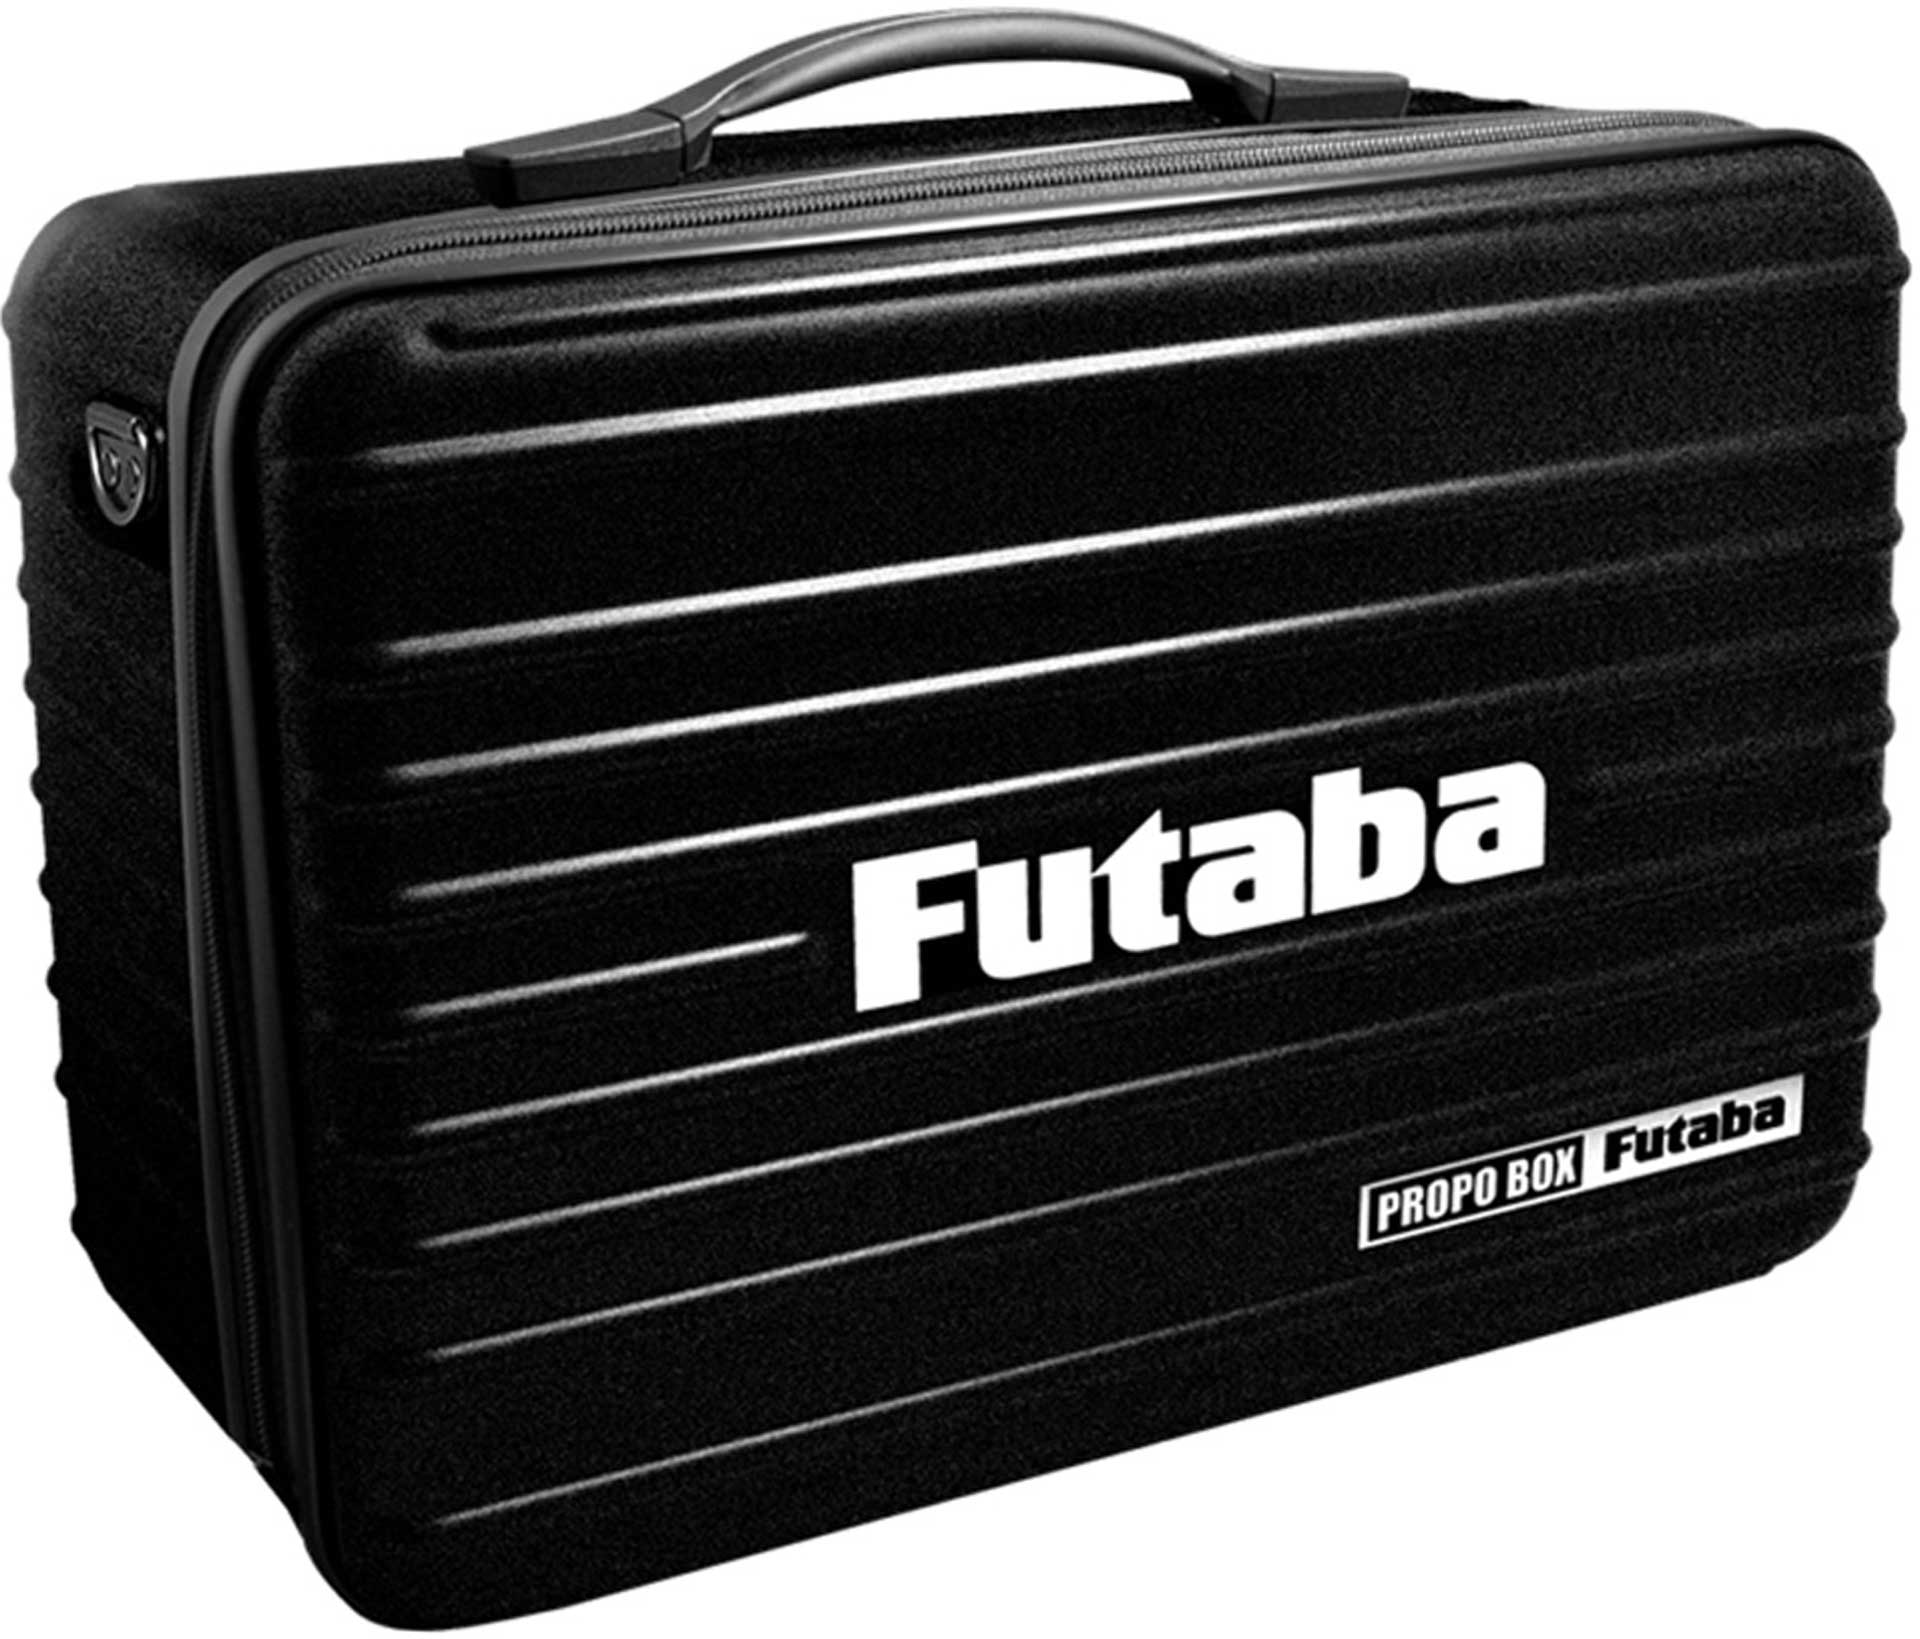 FUTABA Transmitter case with zipper suitable for all FUTABA transmitters